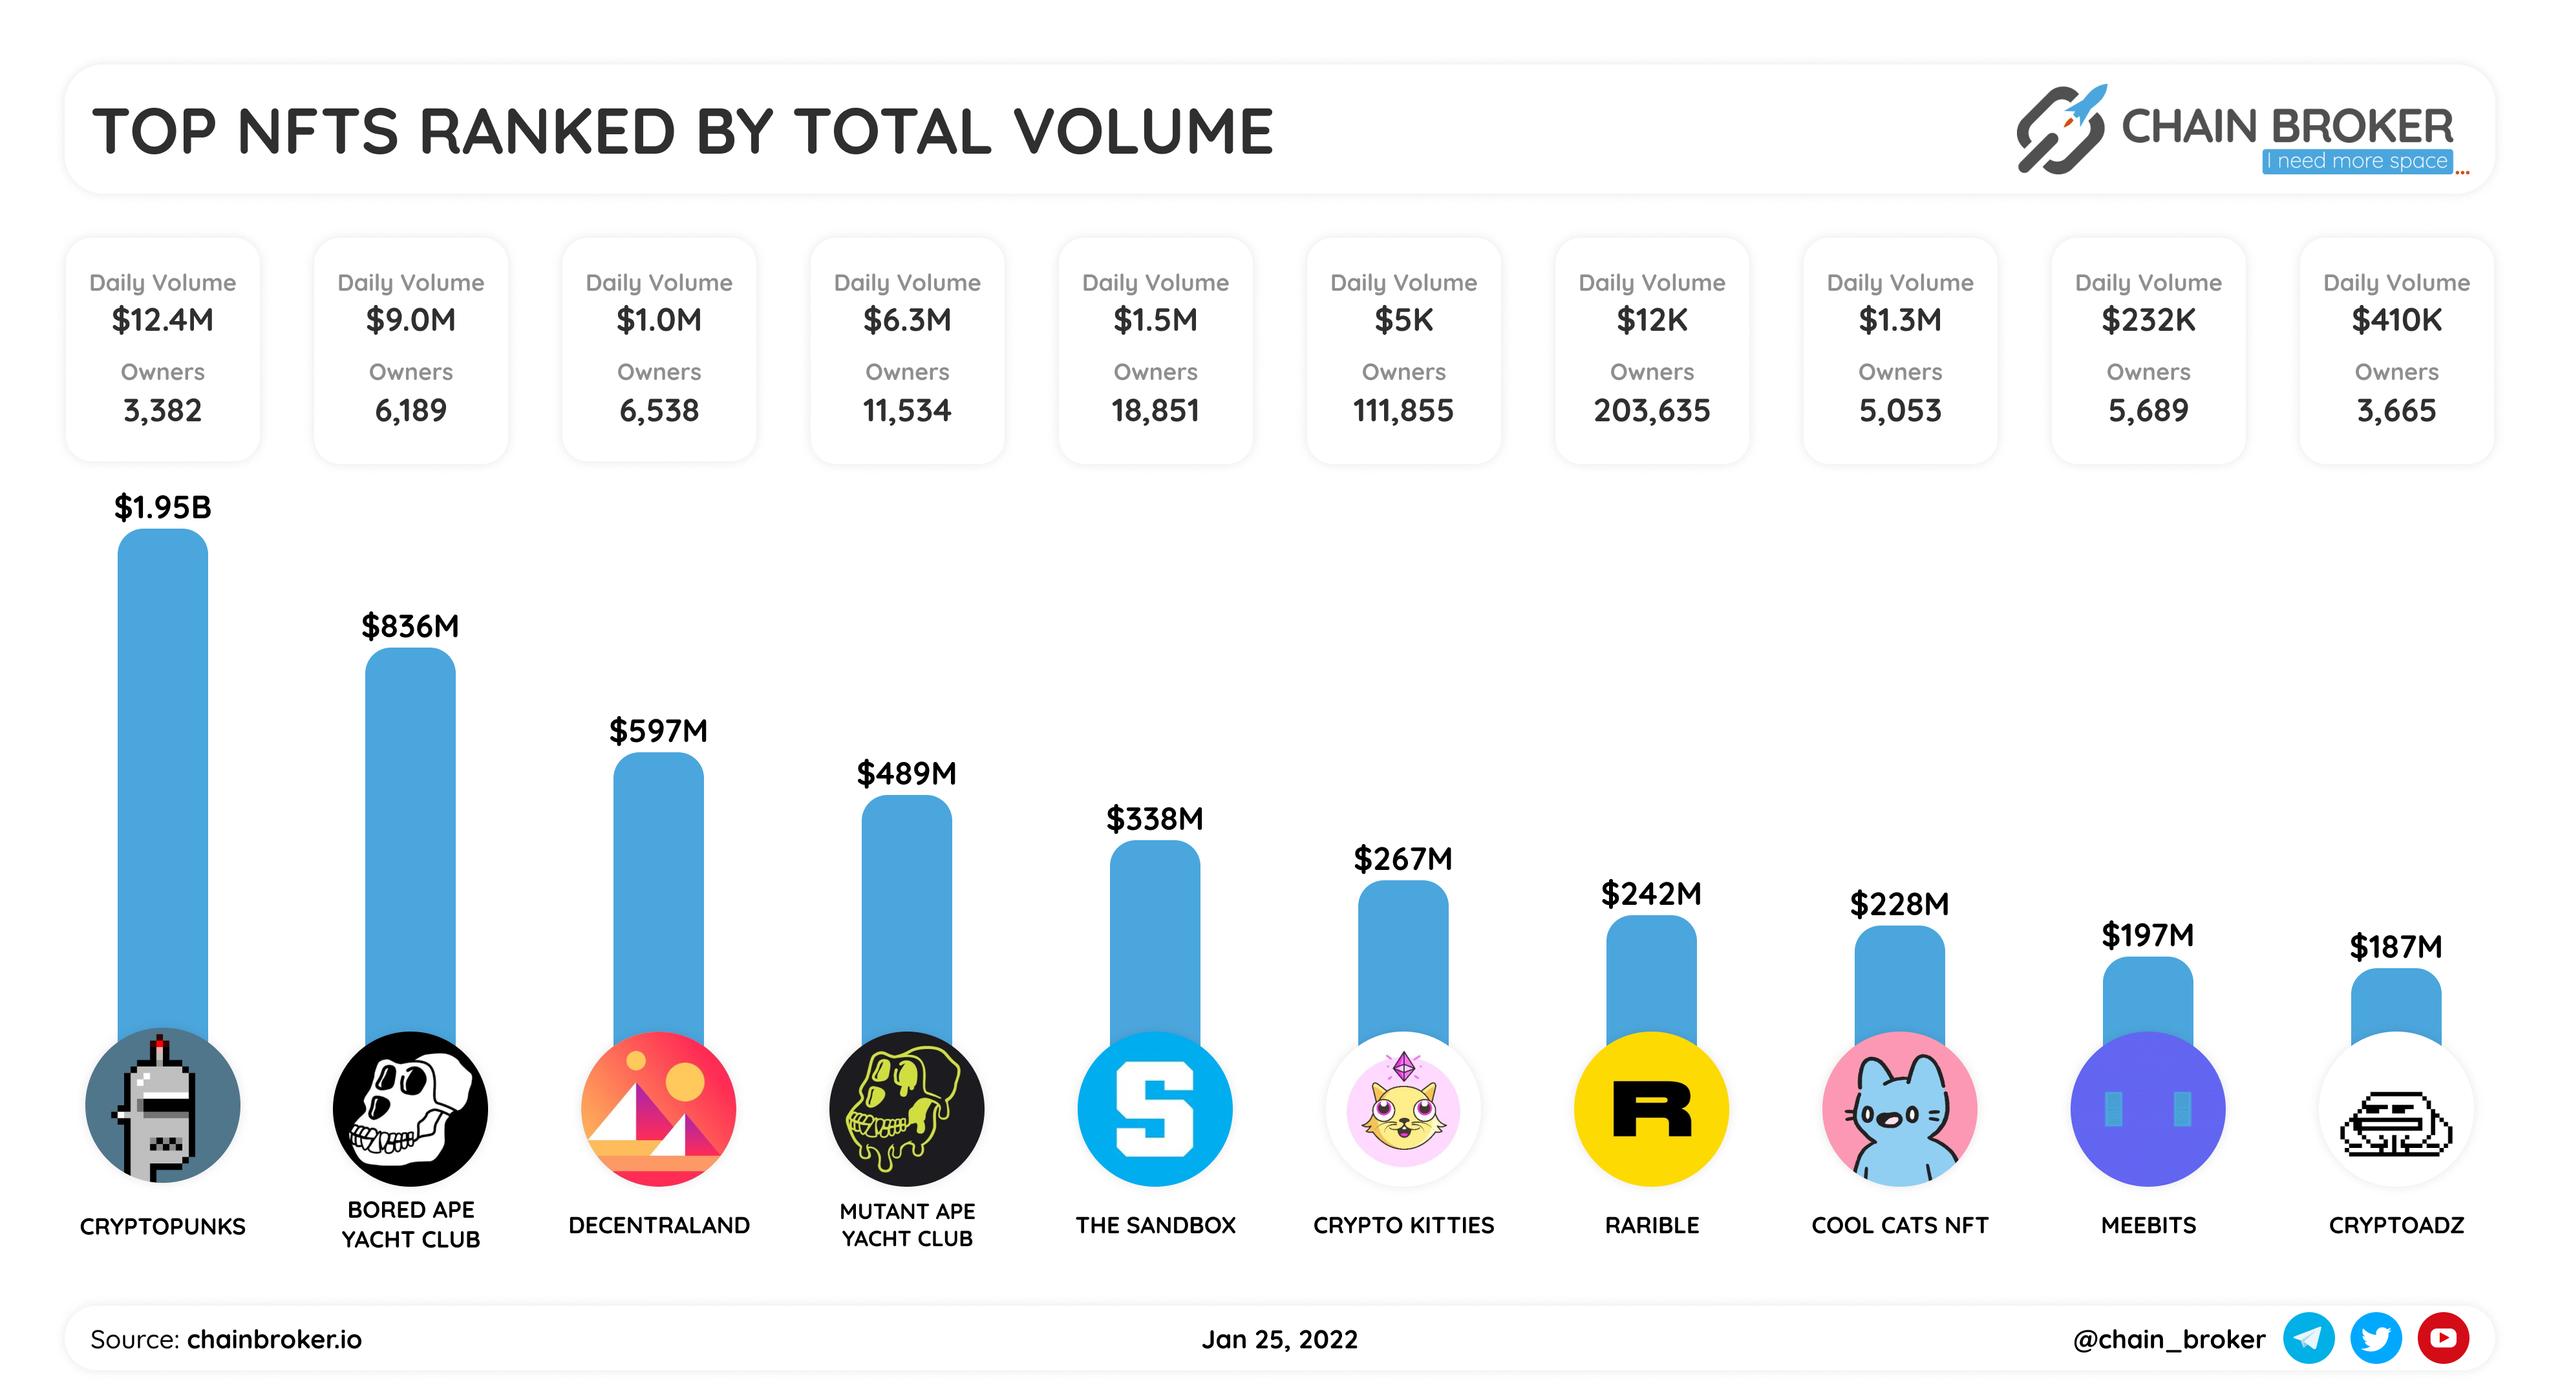 Top NFTs ranked by total volume